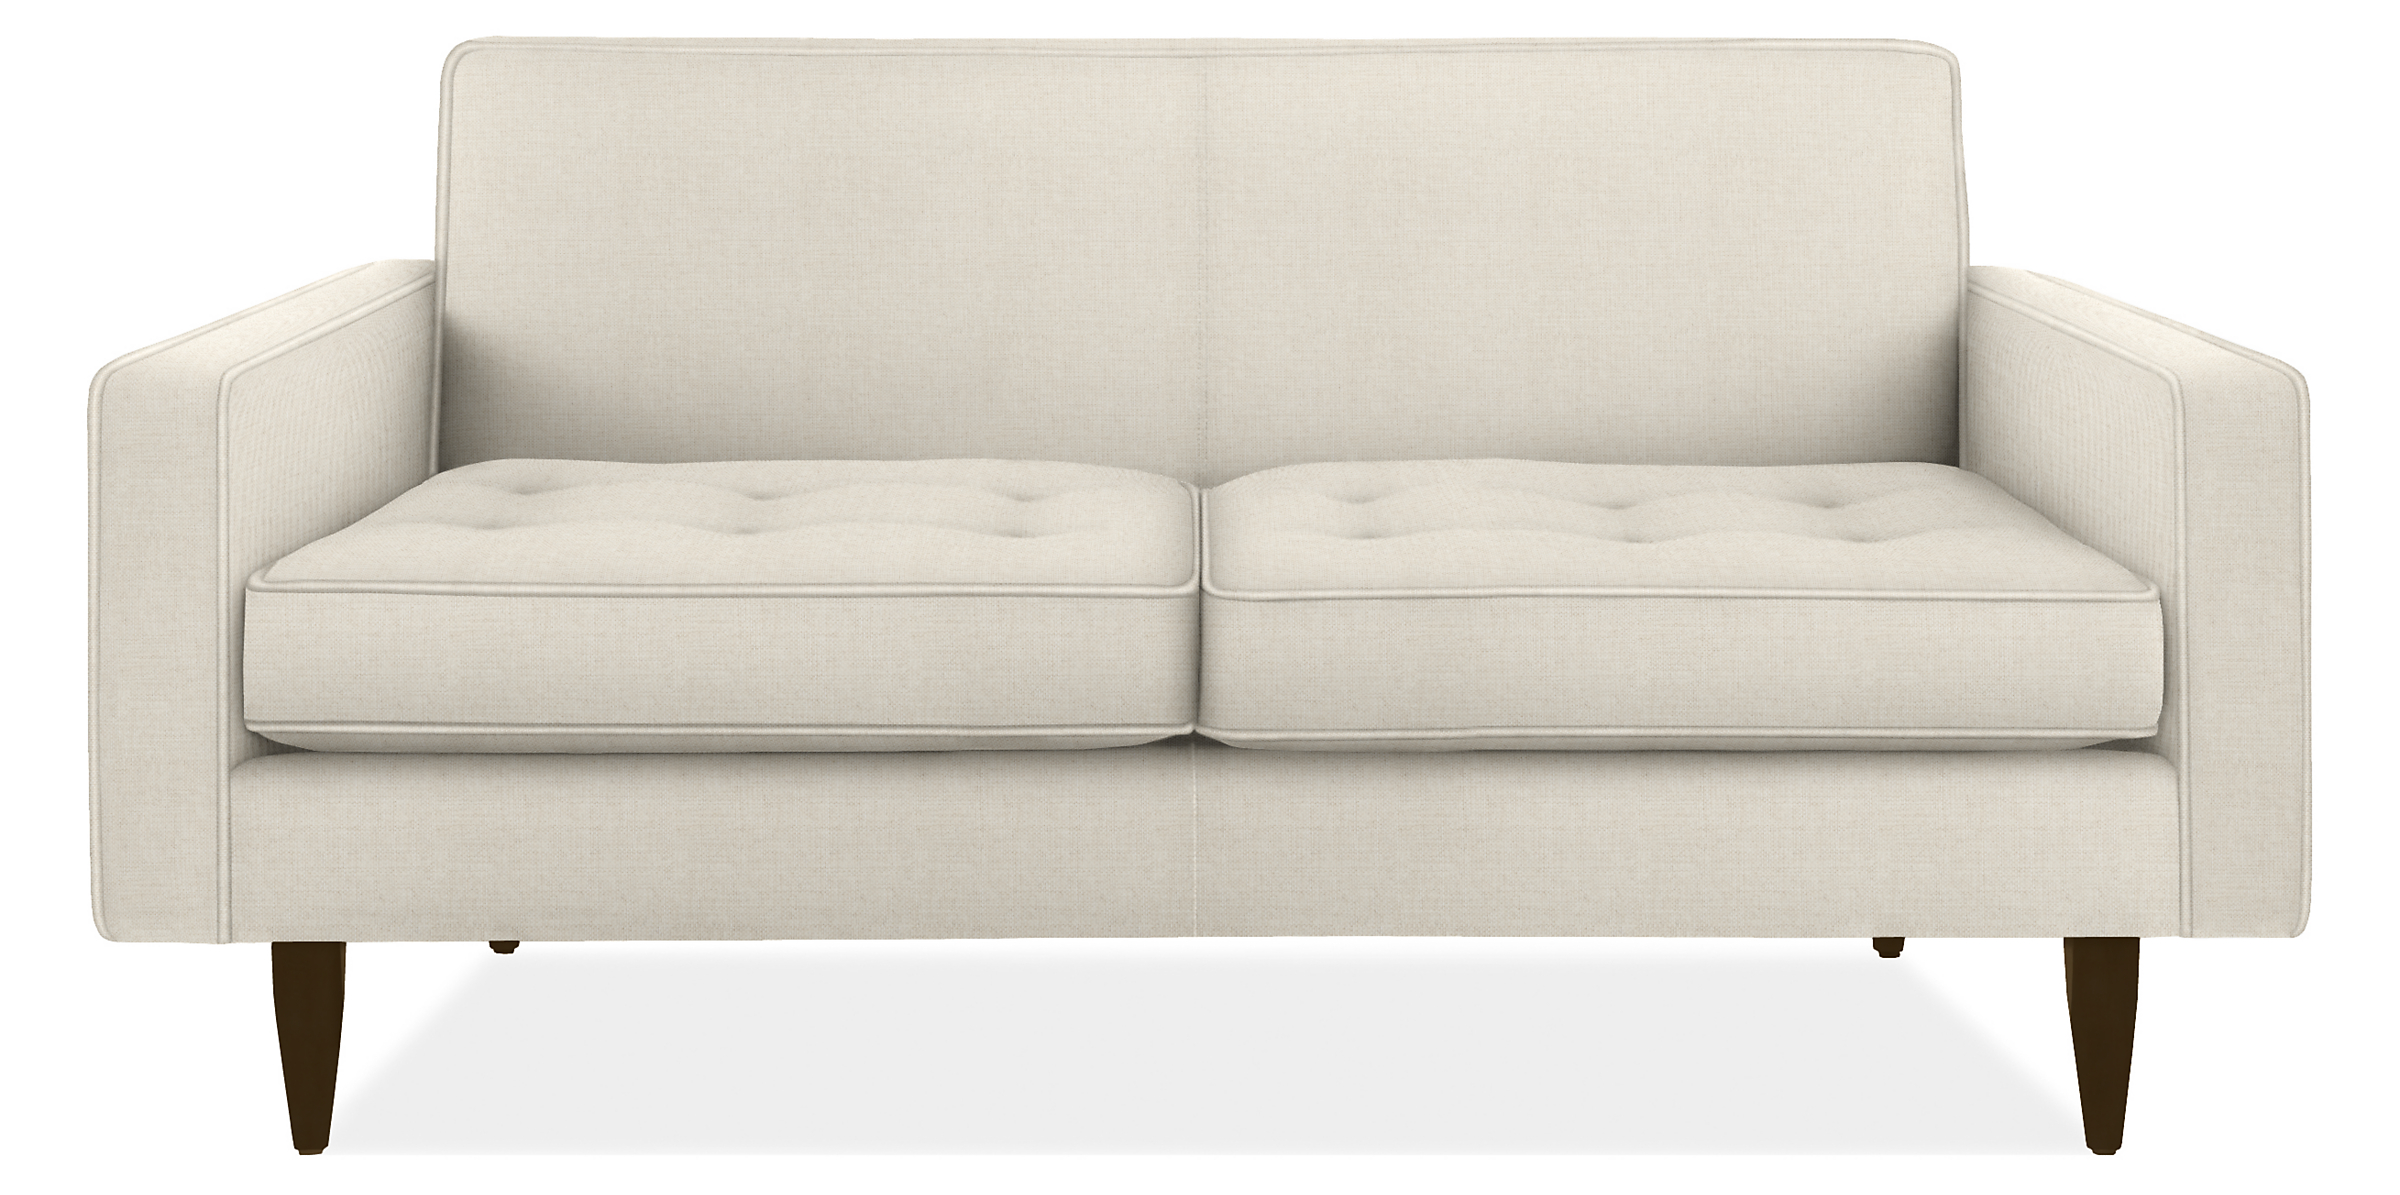 Reese 65" Loveseat in Sumner Ivory with Charcoal Legs